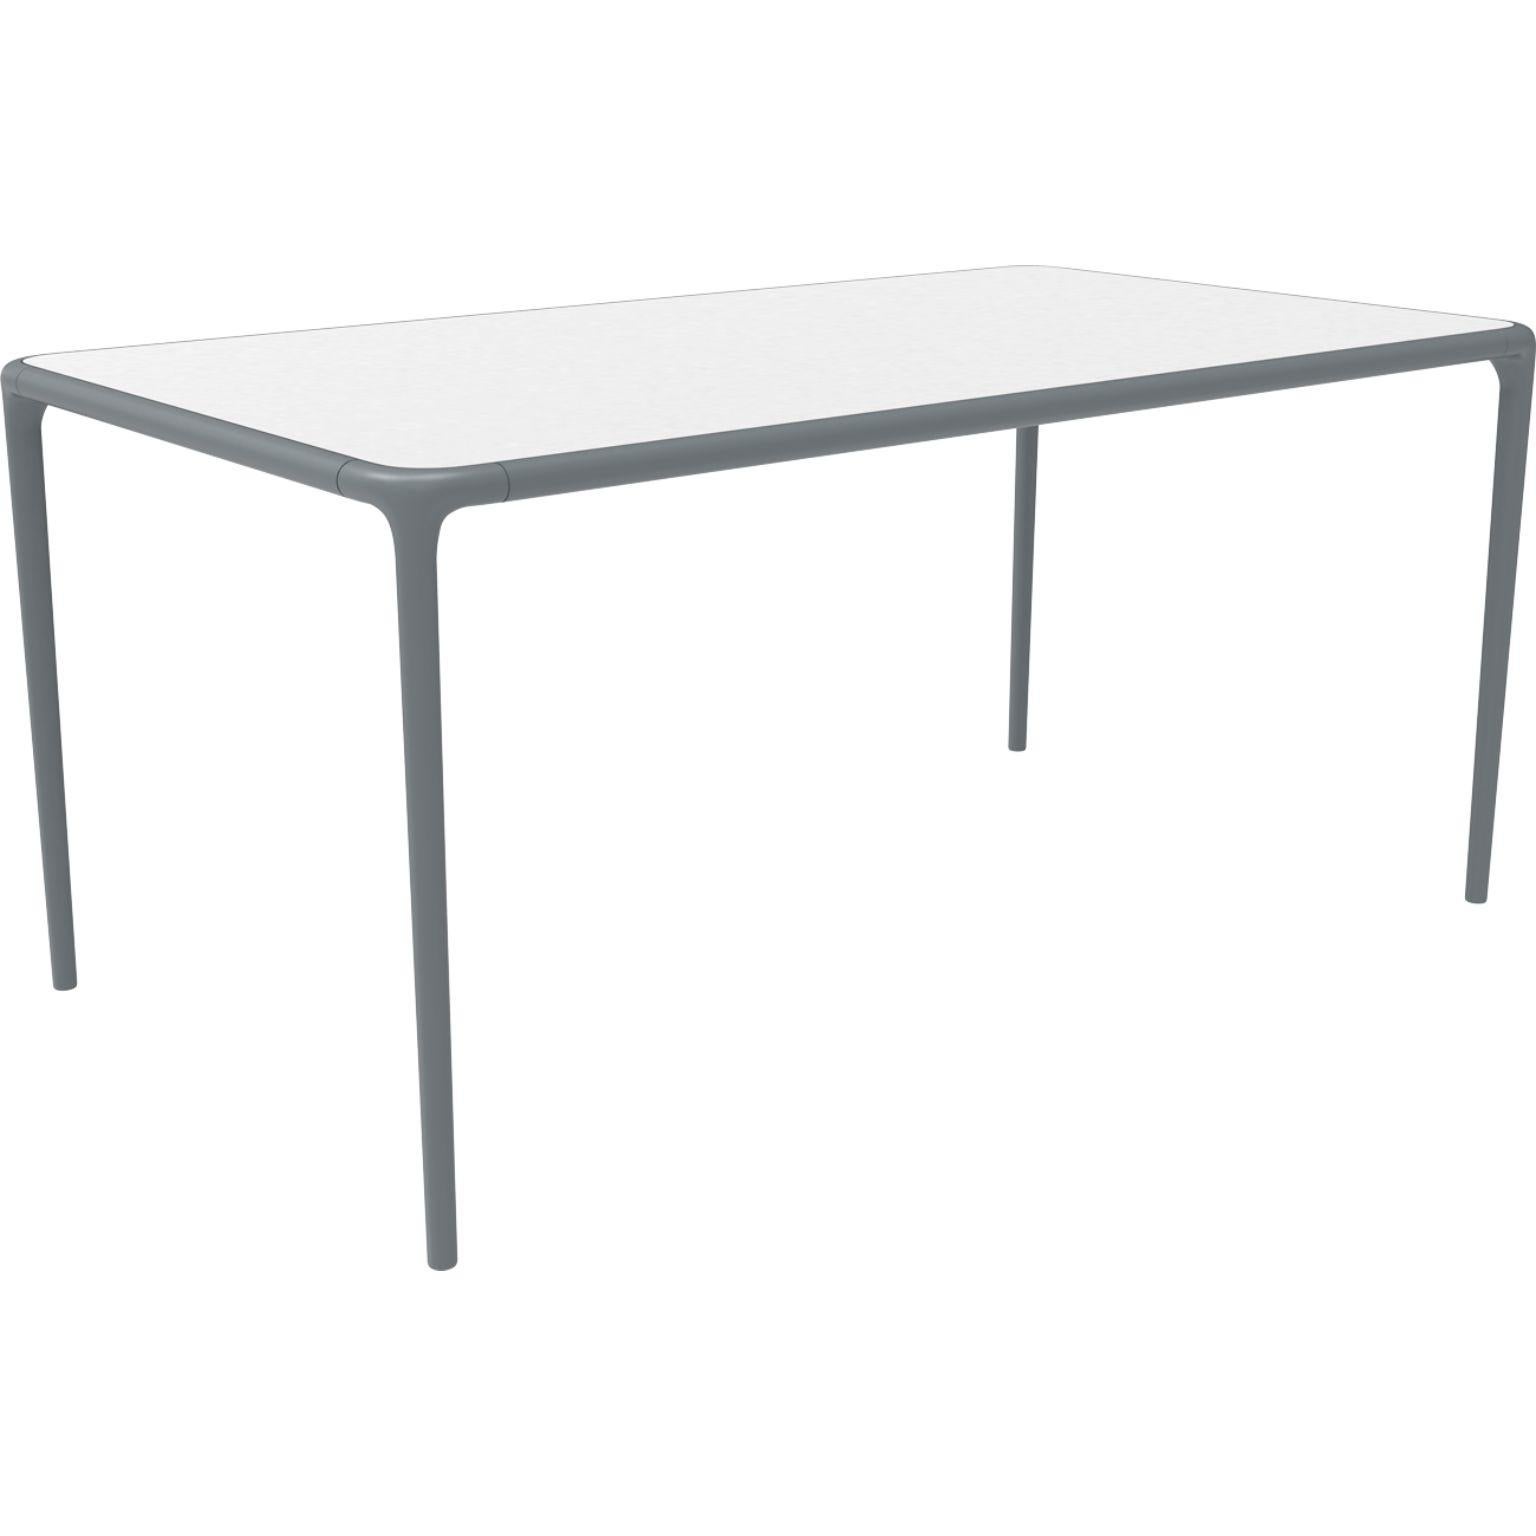 Xaloc grey glass top table 160 by Mowee.
Dimensions: D160 x W90 x H74 cm.
Material: Aluminum, tinted tempered glass top.
Also available in different aluminum colors and finishes (HPL Black Edge or Neolith). 

 Xaloc synthesizes the lines of